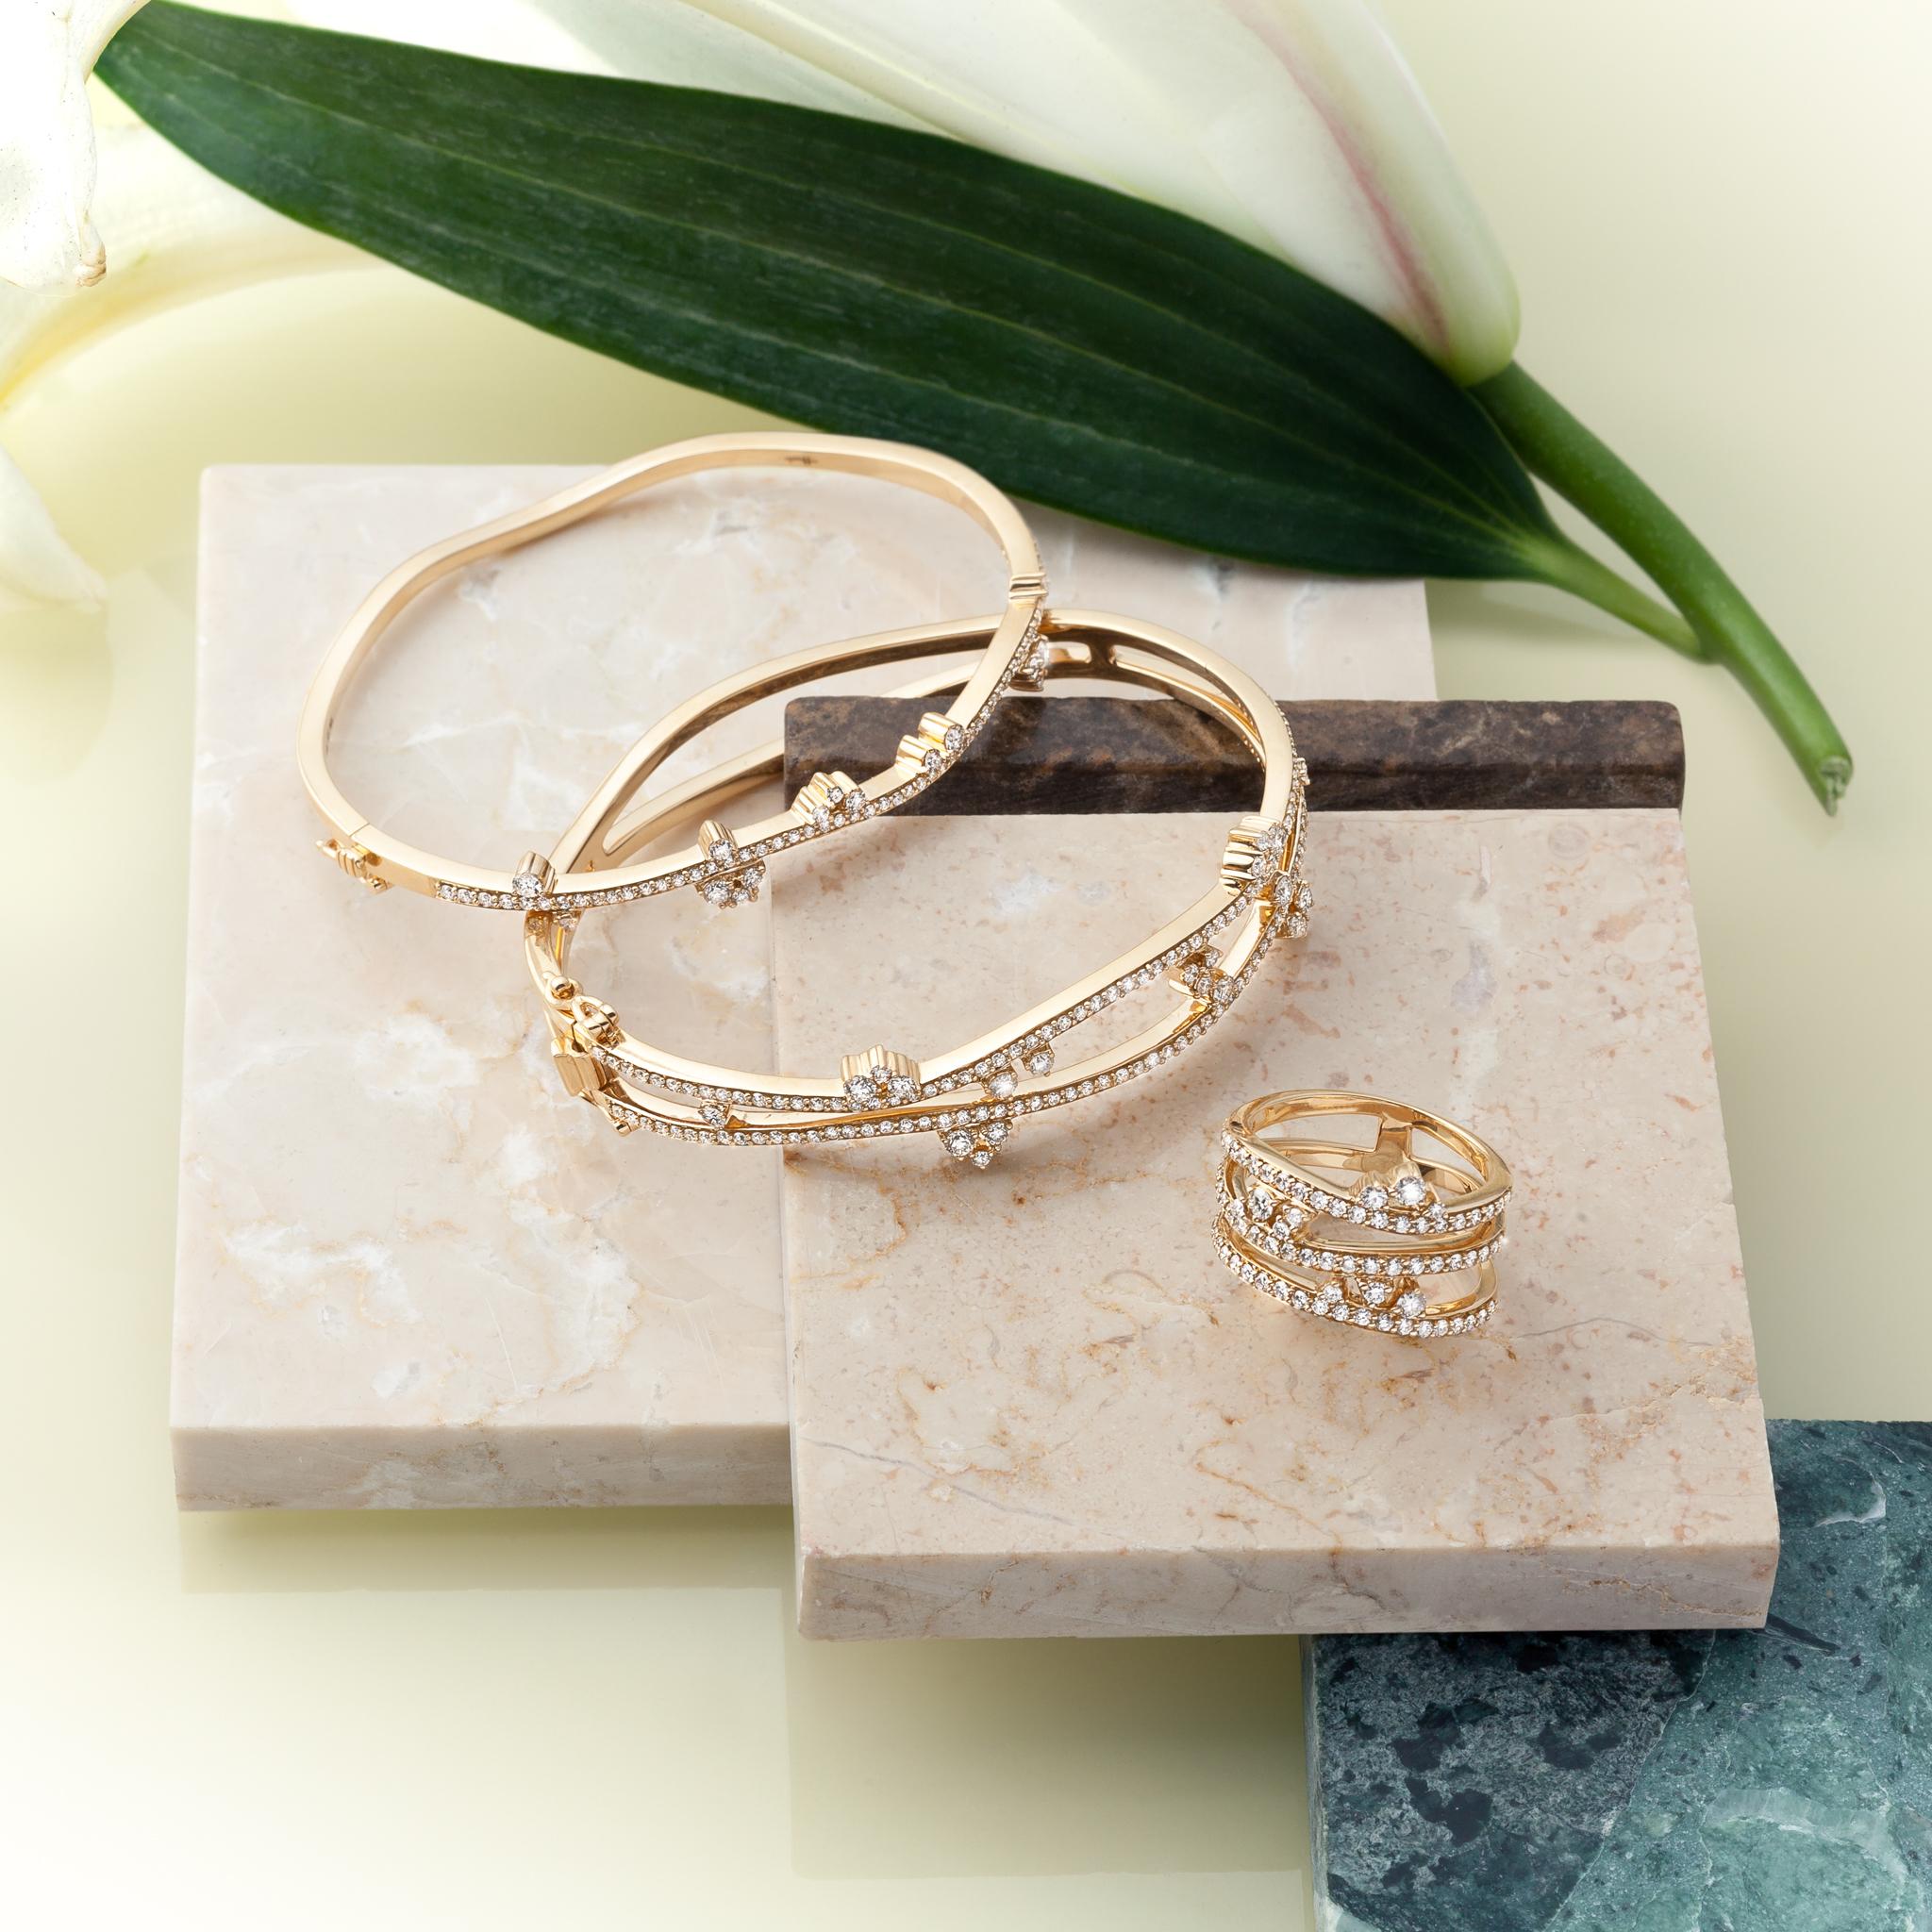 Drawing inspiration from your daydreams, the Reverie collection plays with your imagination. With sparkling nuances set against a canvas of gold luster, each piece in this anthology exudes an energy that shifts and sparkles with your every move.
